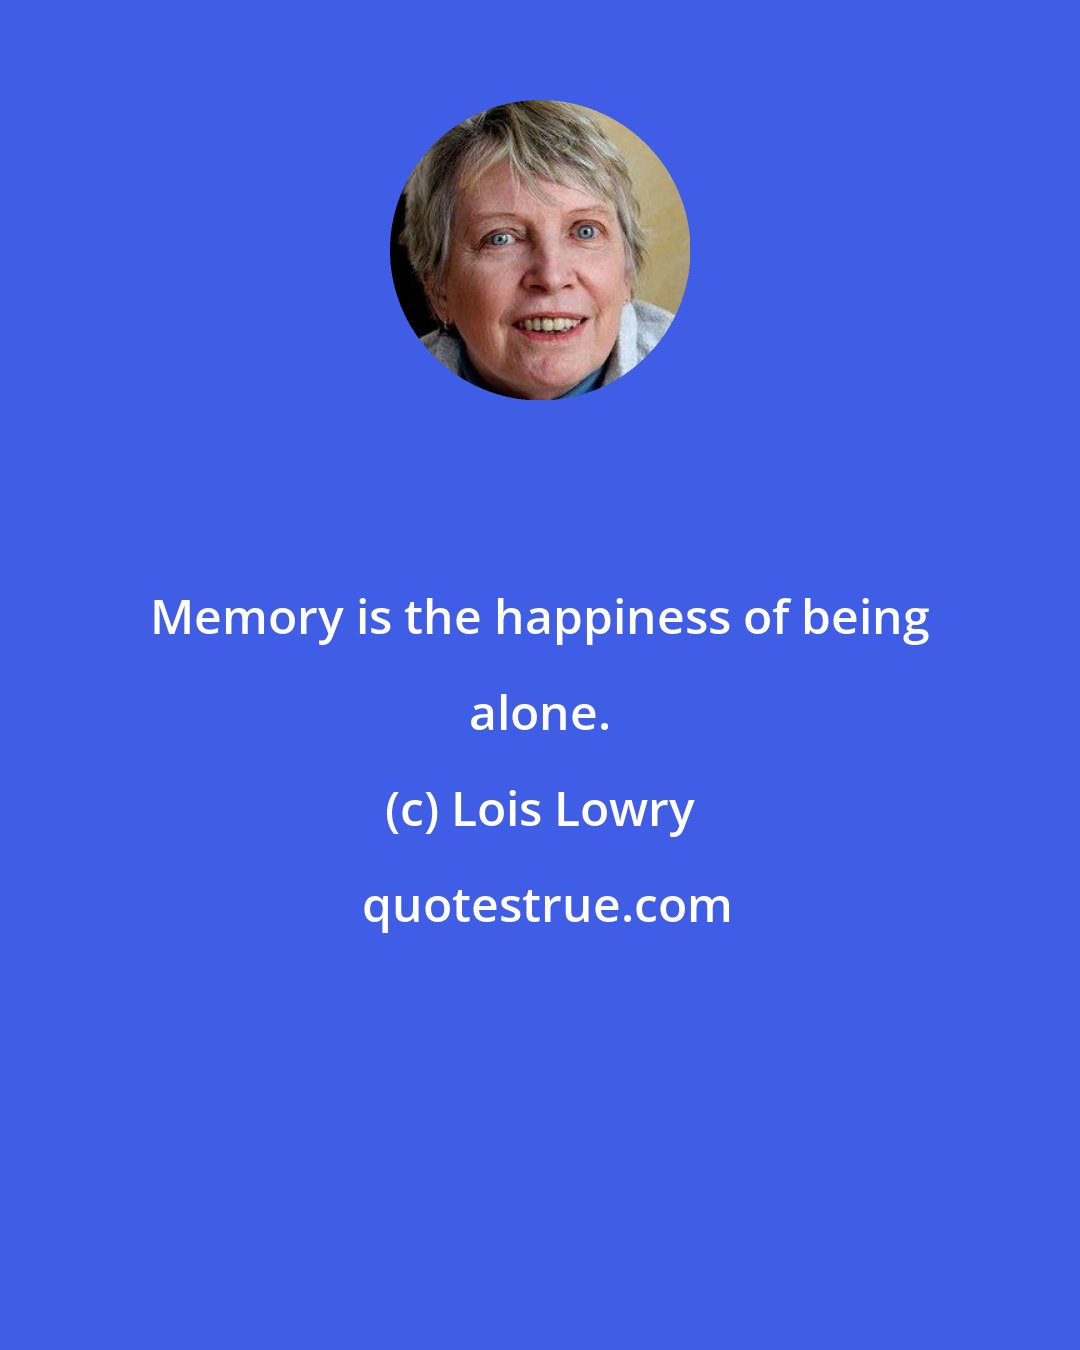 Lois Lowry: Memory is the happiness of being alone.